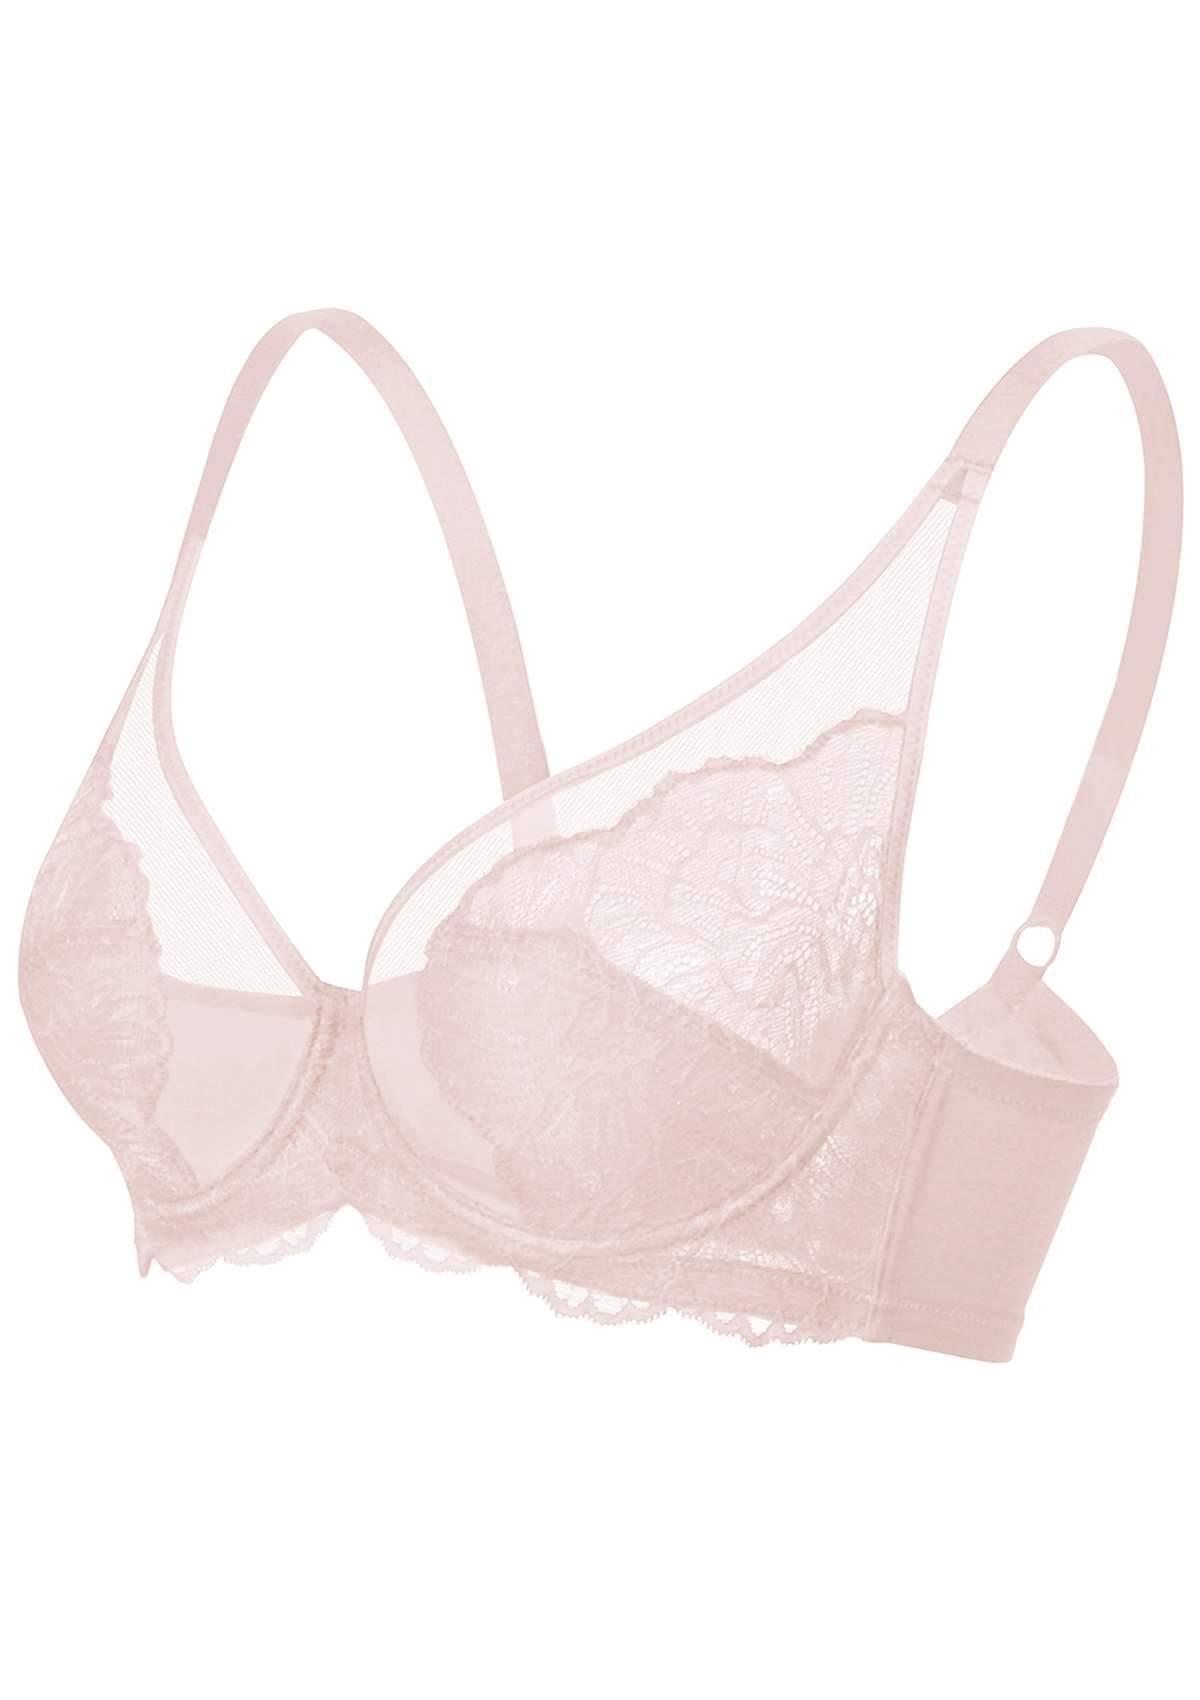 HSIA Blossom Lace Bra And Panties Set: Best Bra For Large Busts - Dark Pink / 38 / G